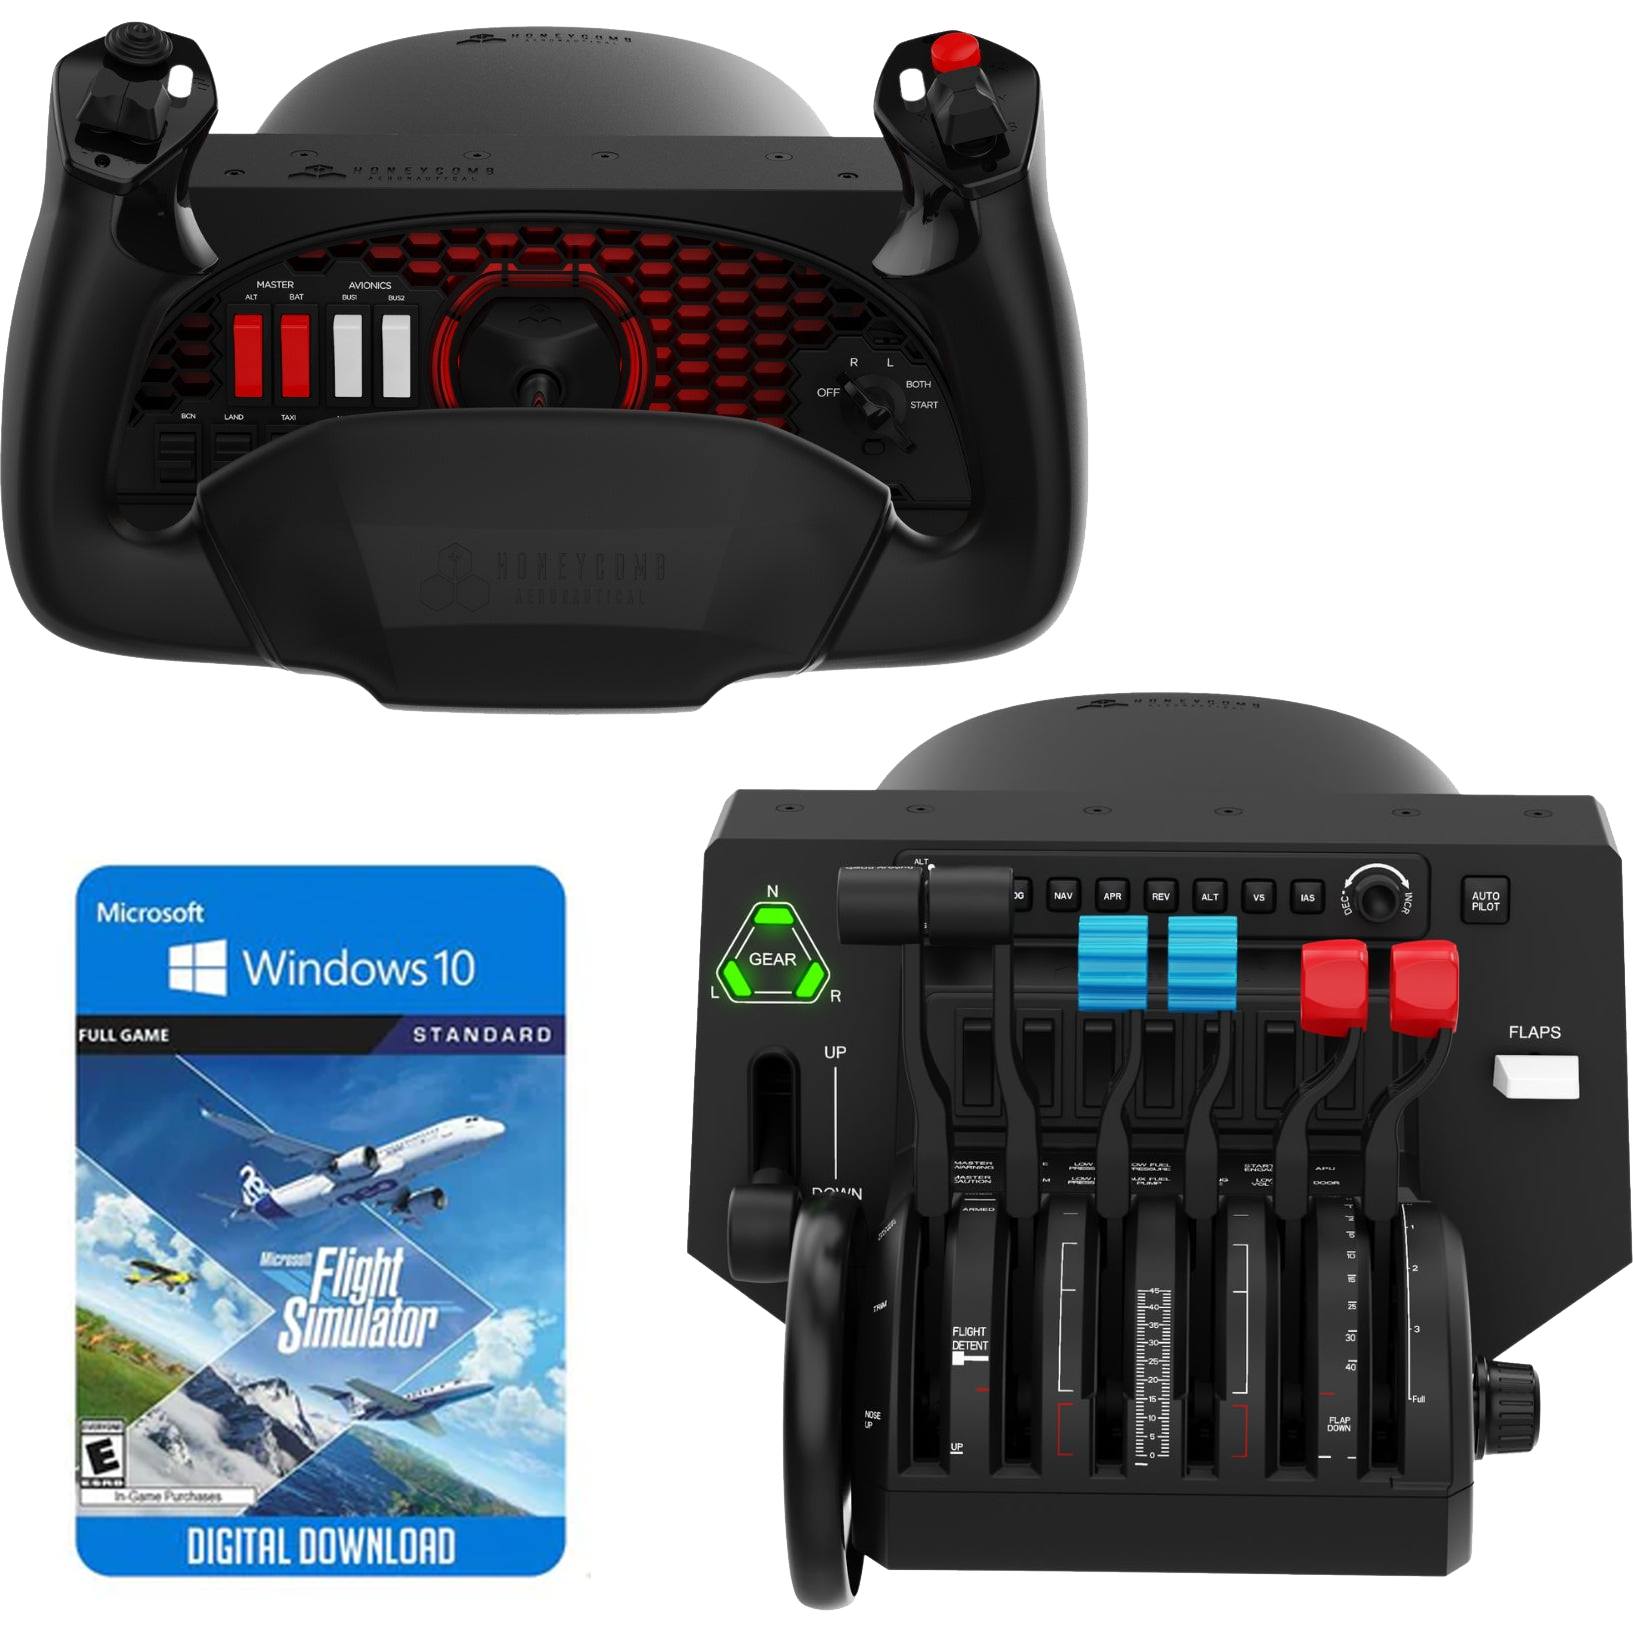  Honeycomb Aeronautical Alpha Flight Controls Yoke & Switch  Panel in aviation quality for flight simulators, Universal control system  for simmers, student pilots and pilots